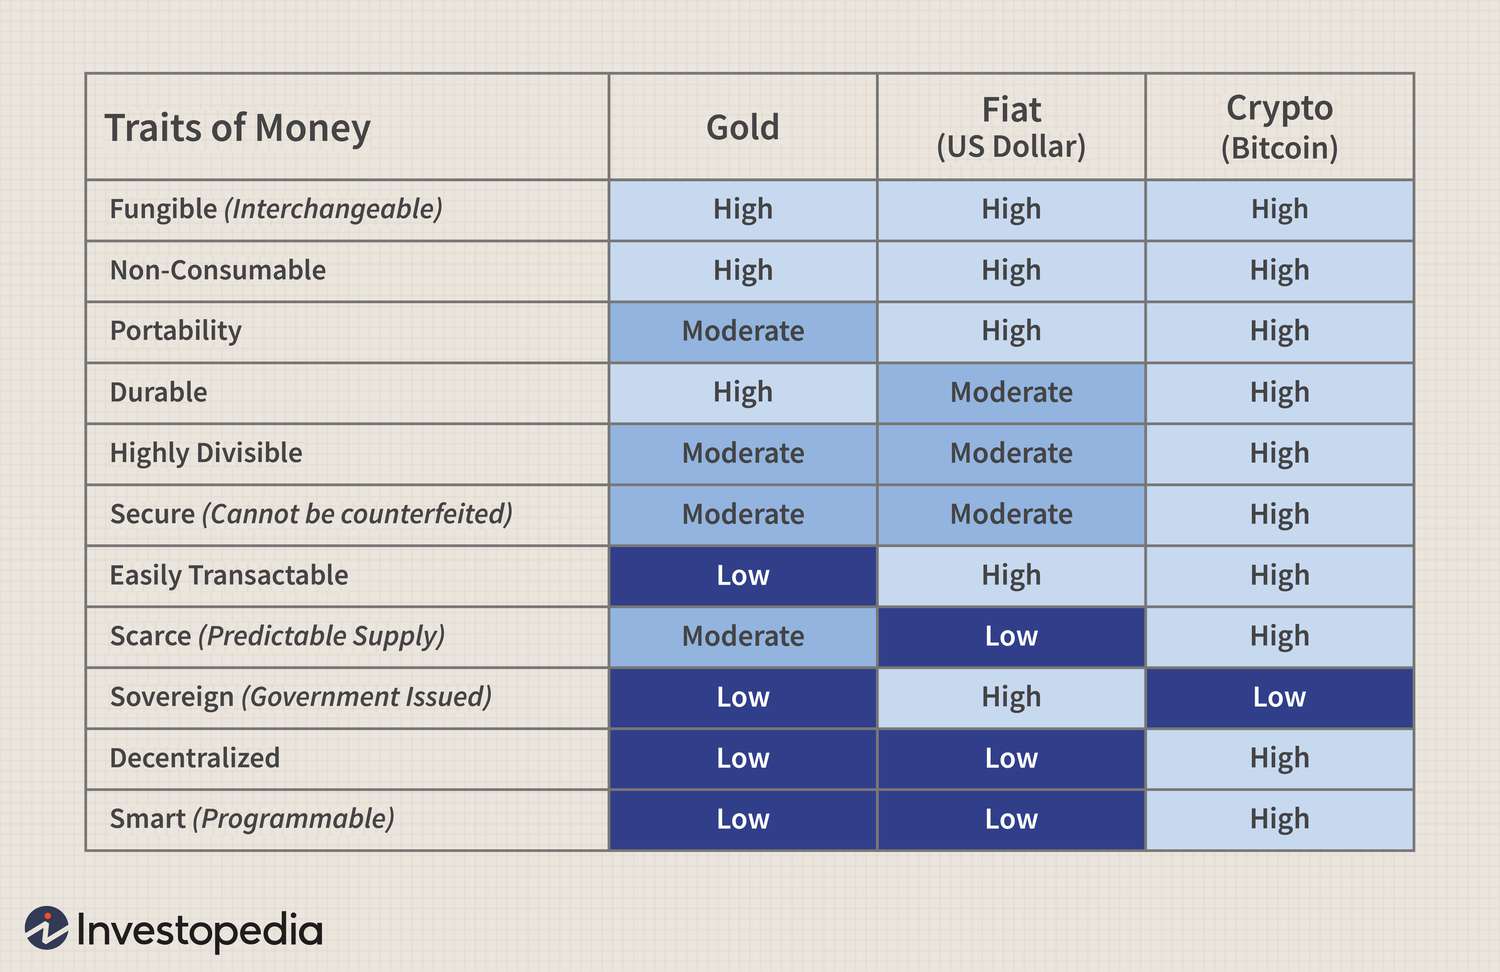 Intrinsic value in crypto currencies